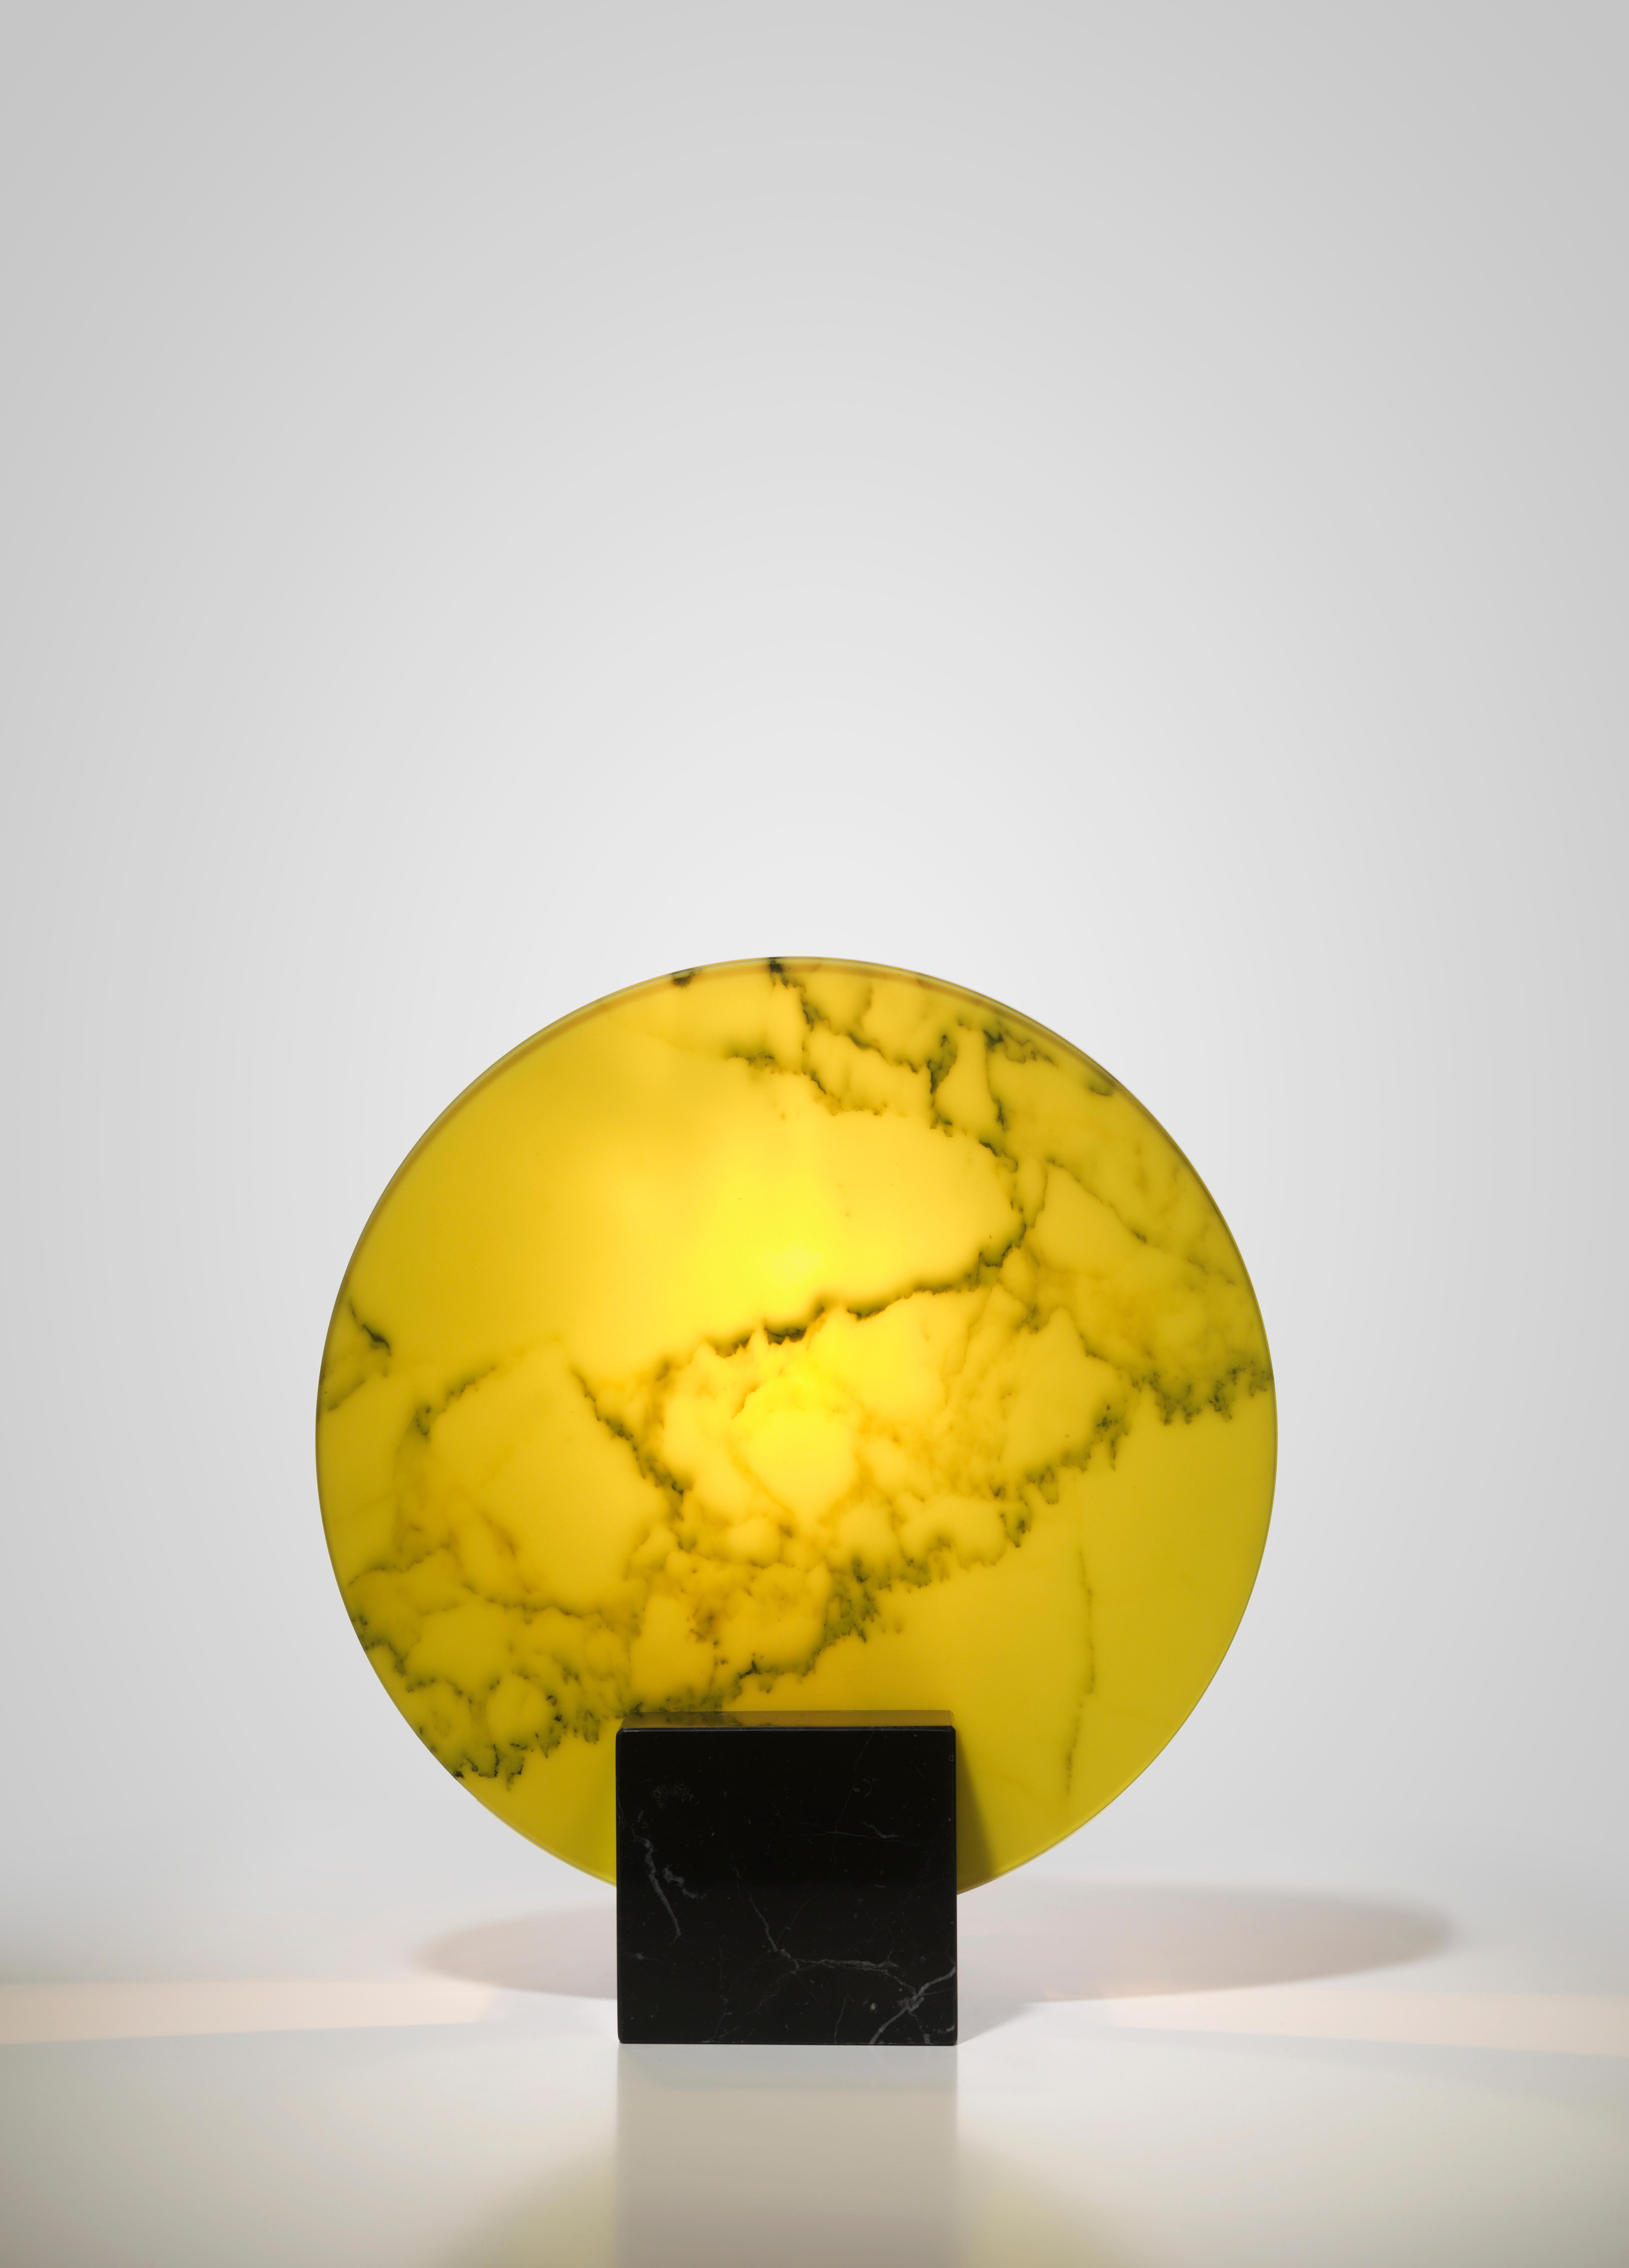 A layer of white Carrara marble and acid yellow tinted optical acrylic are sandwiched together to form an illuminated circular diffuser for this sculptural table Lamp. Set into a solid black Nero Marquina marble base, the veins of the Carrara marble